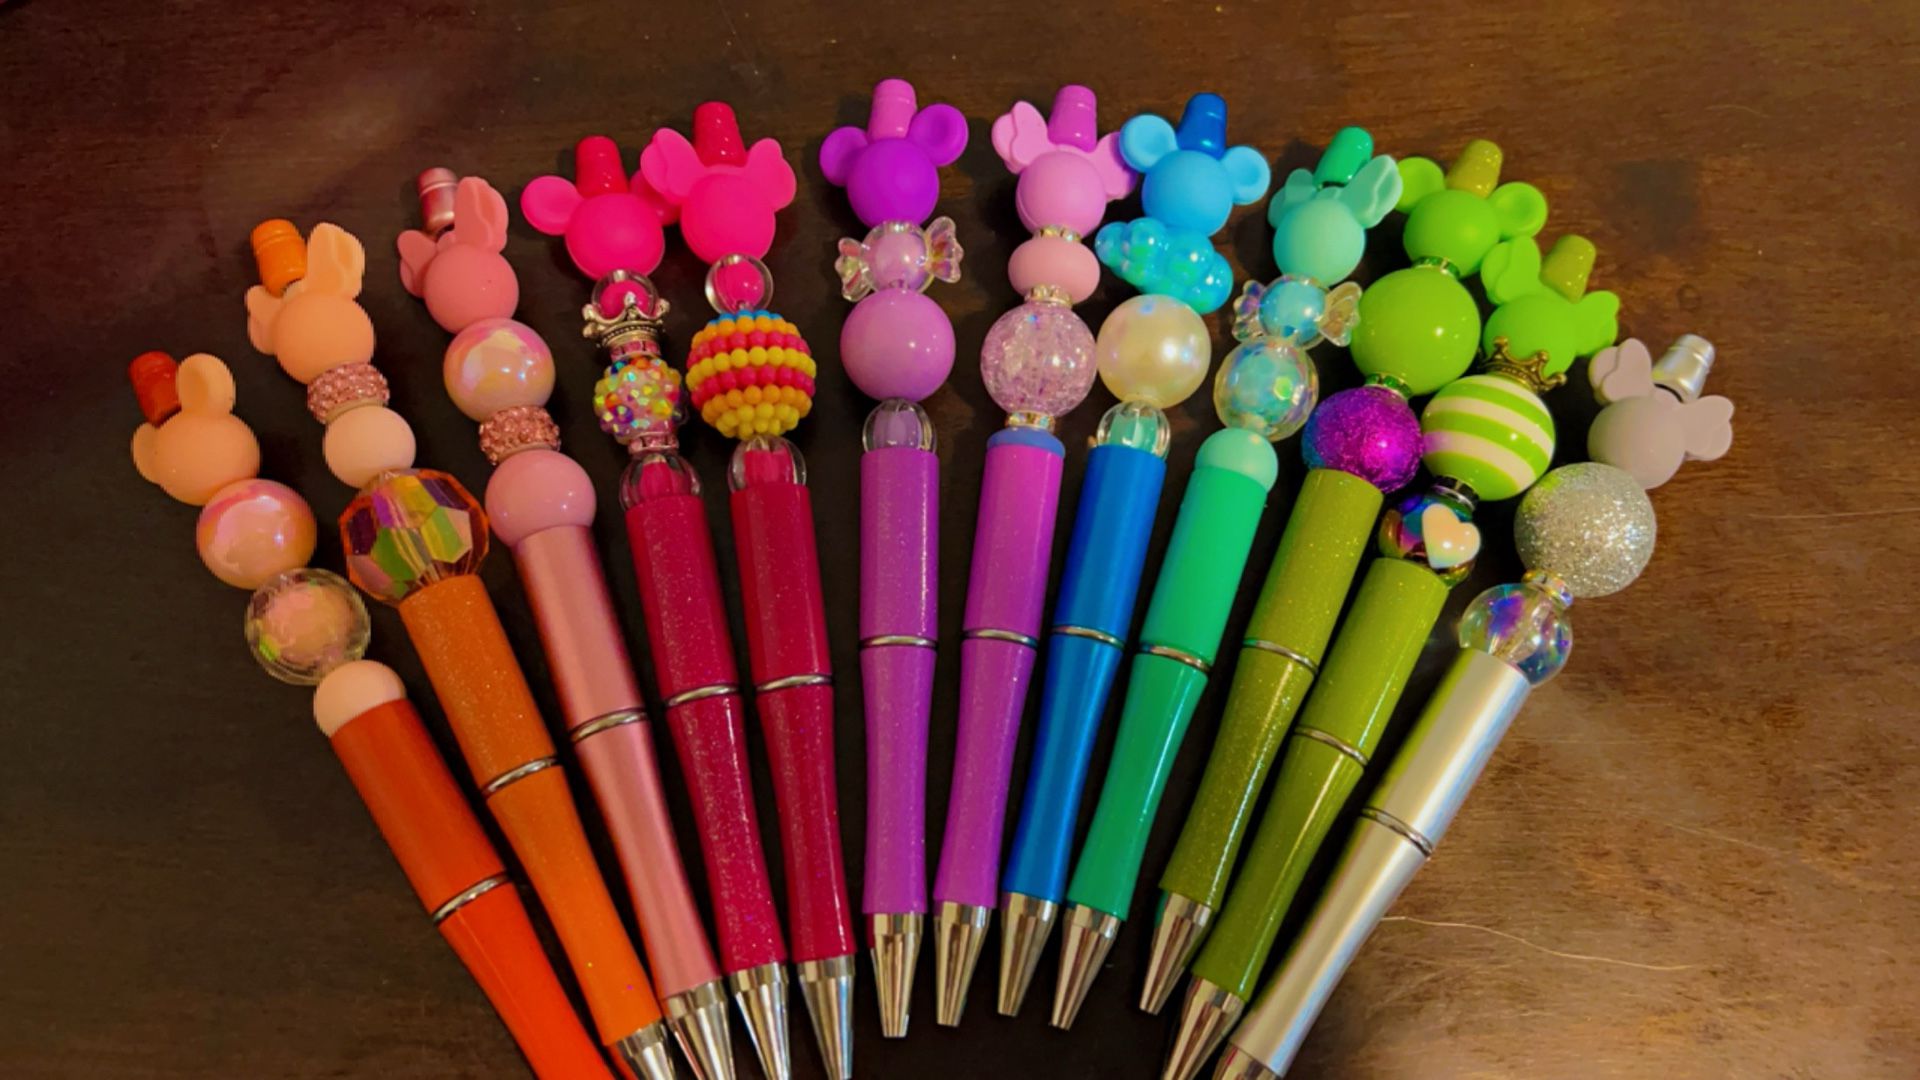 Mickey & Minnie Mouse Beaded Pens